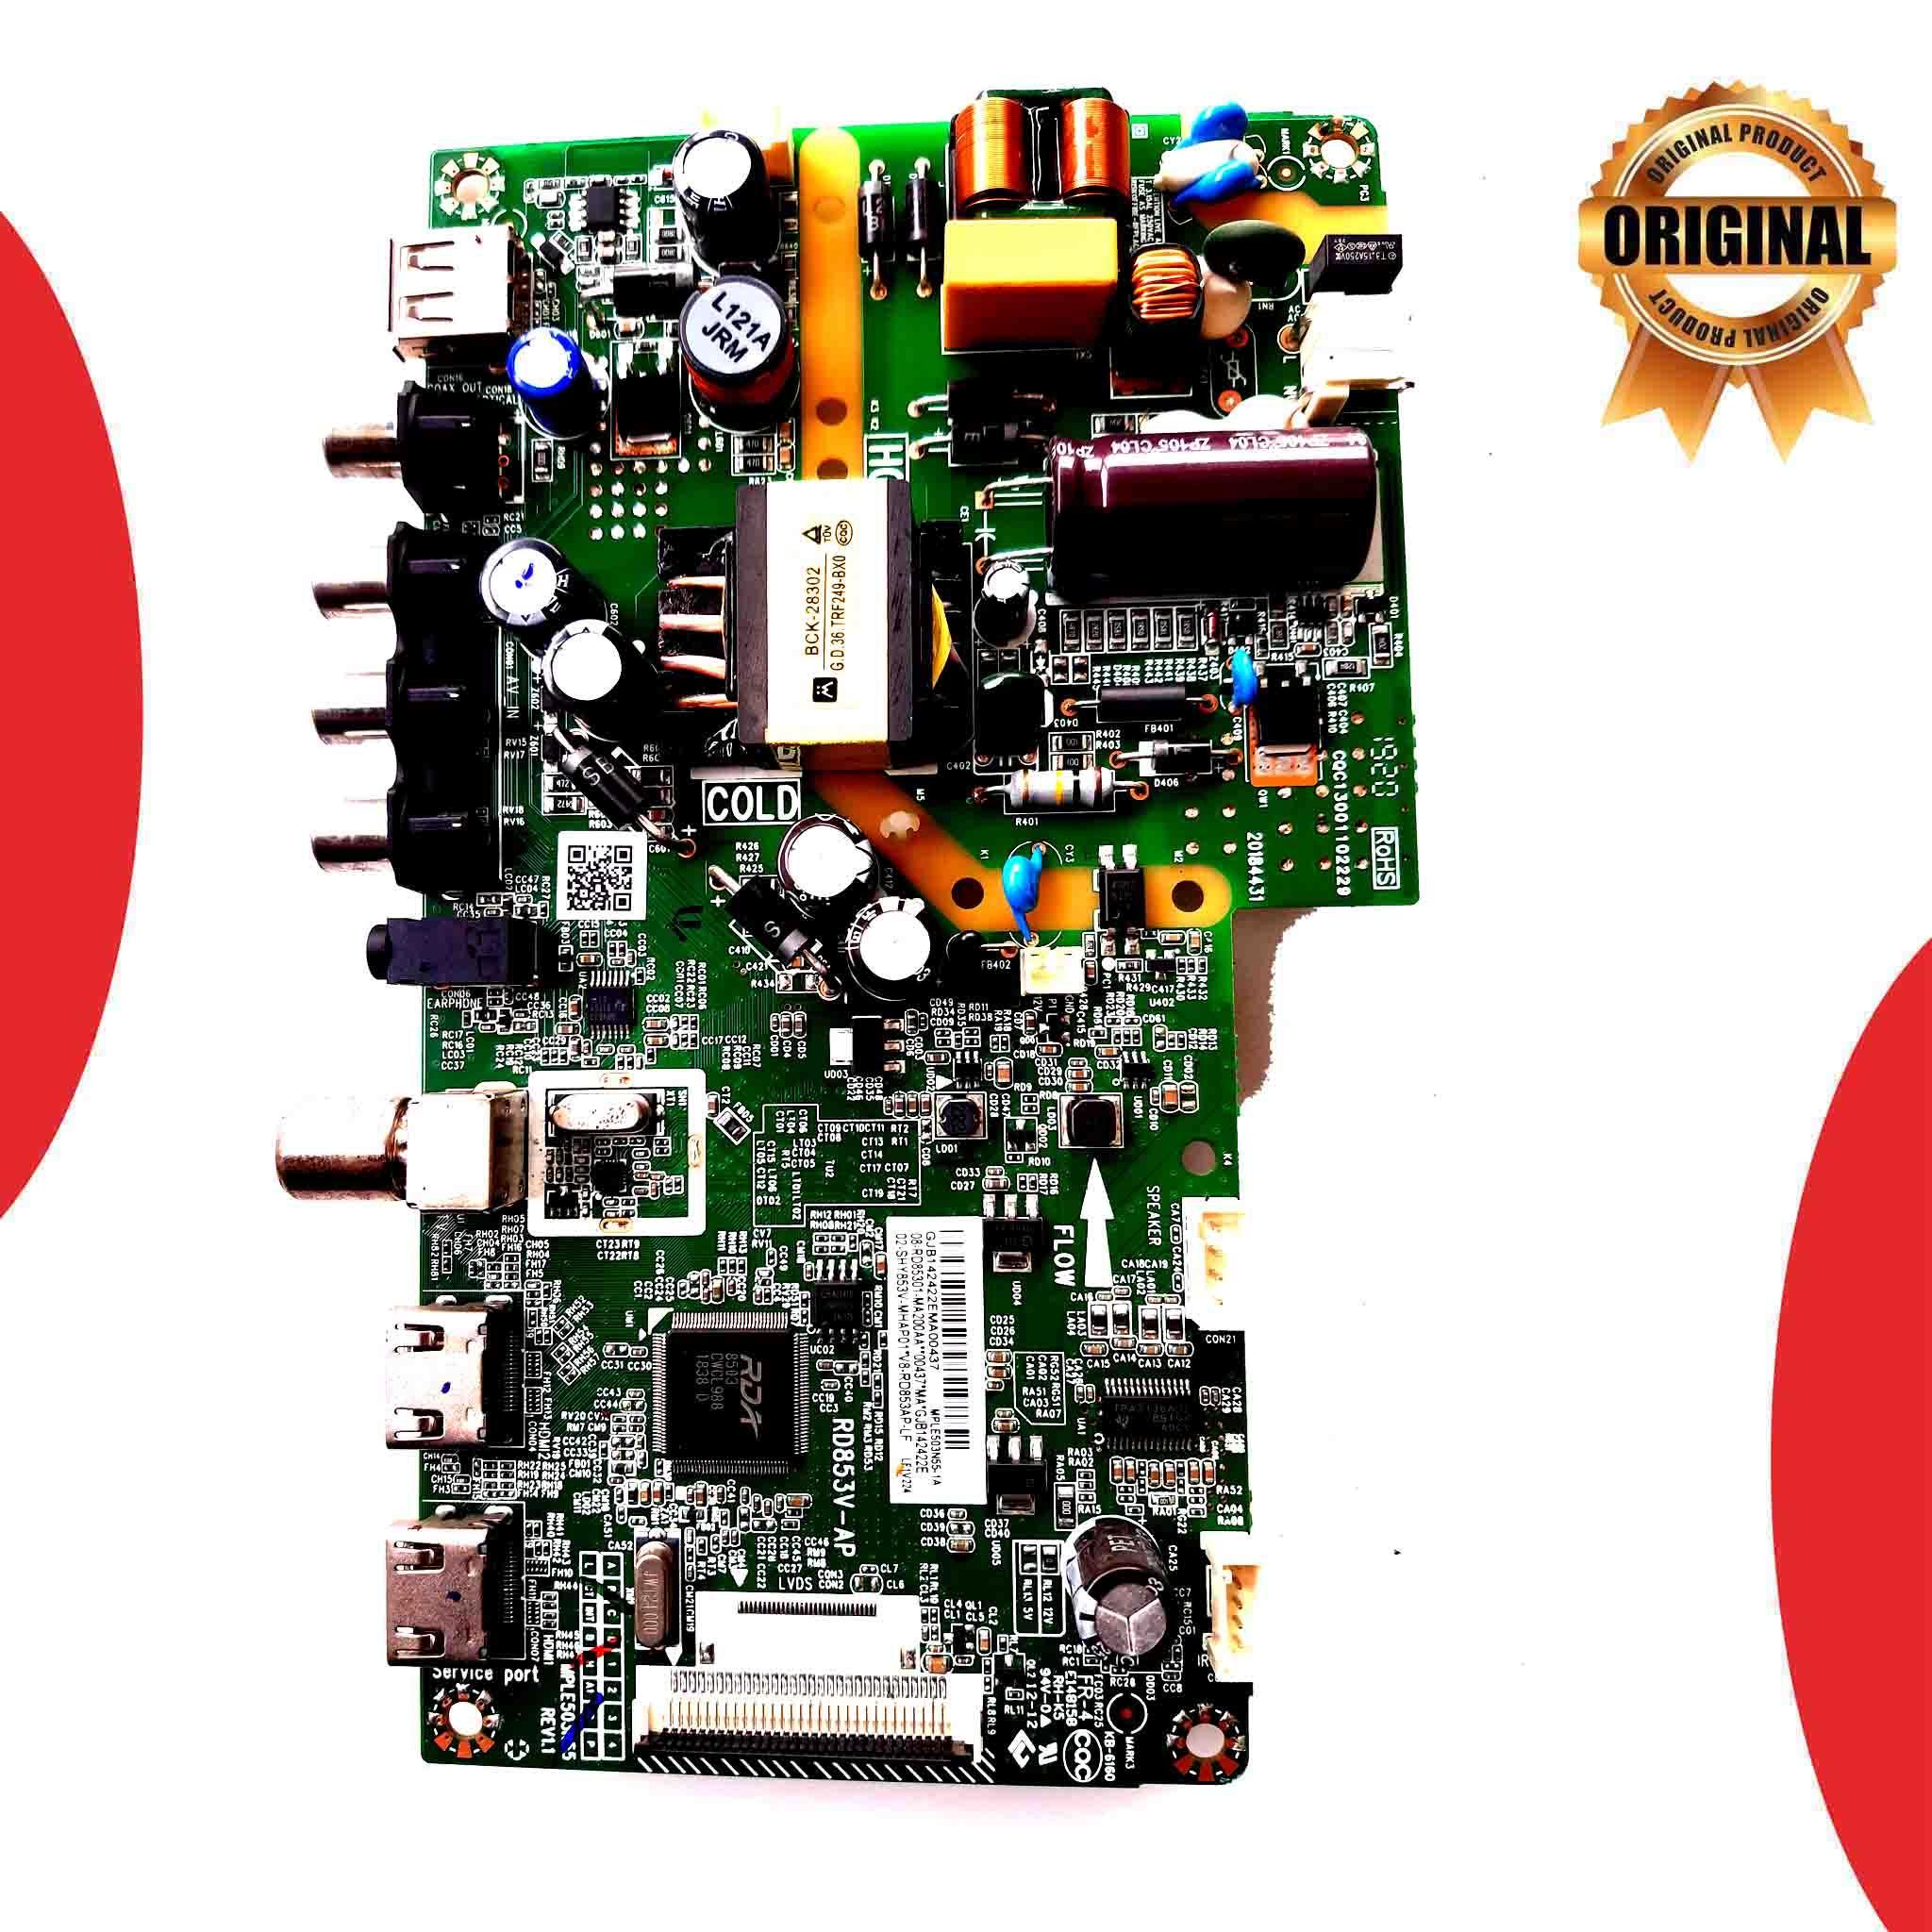 iFFALCON 32 inch LED TV Motherboard for Model 32E3. - Great Bharat Electronics